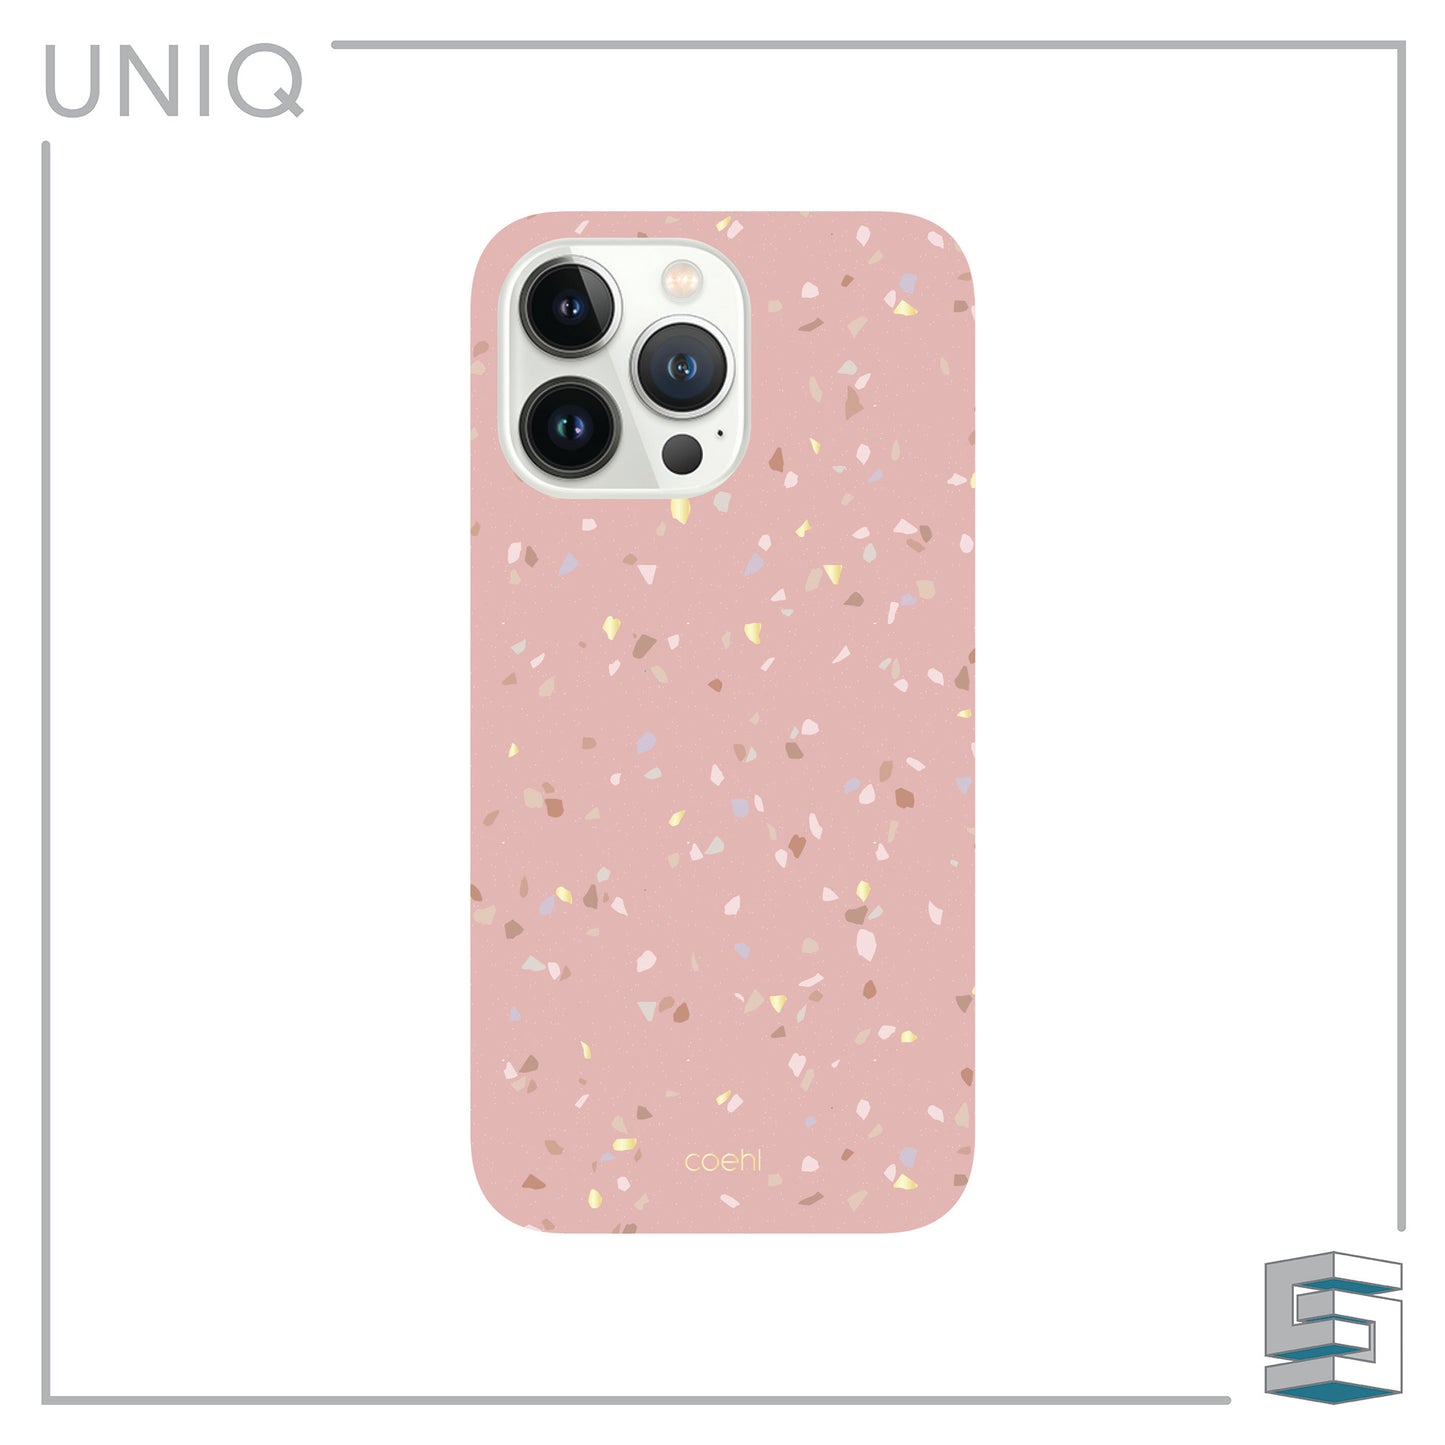 Case for Apple iPhone 14 series - UNIQ Coehl Terrazzo Global Synergy Concepts